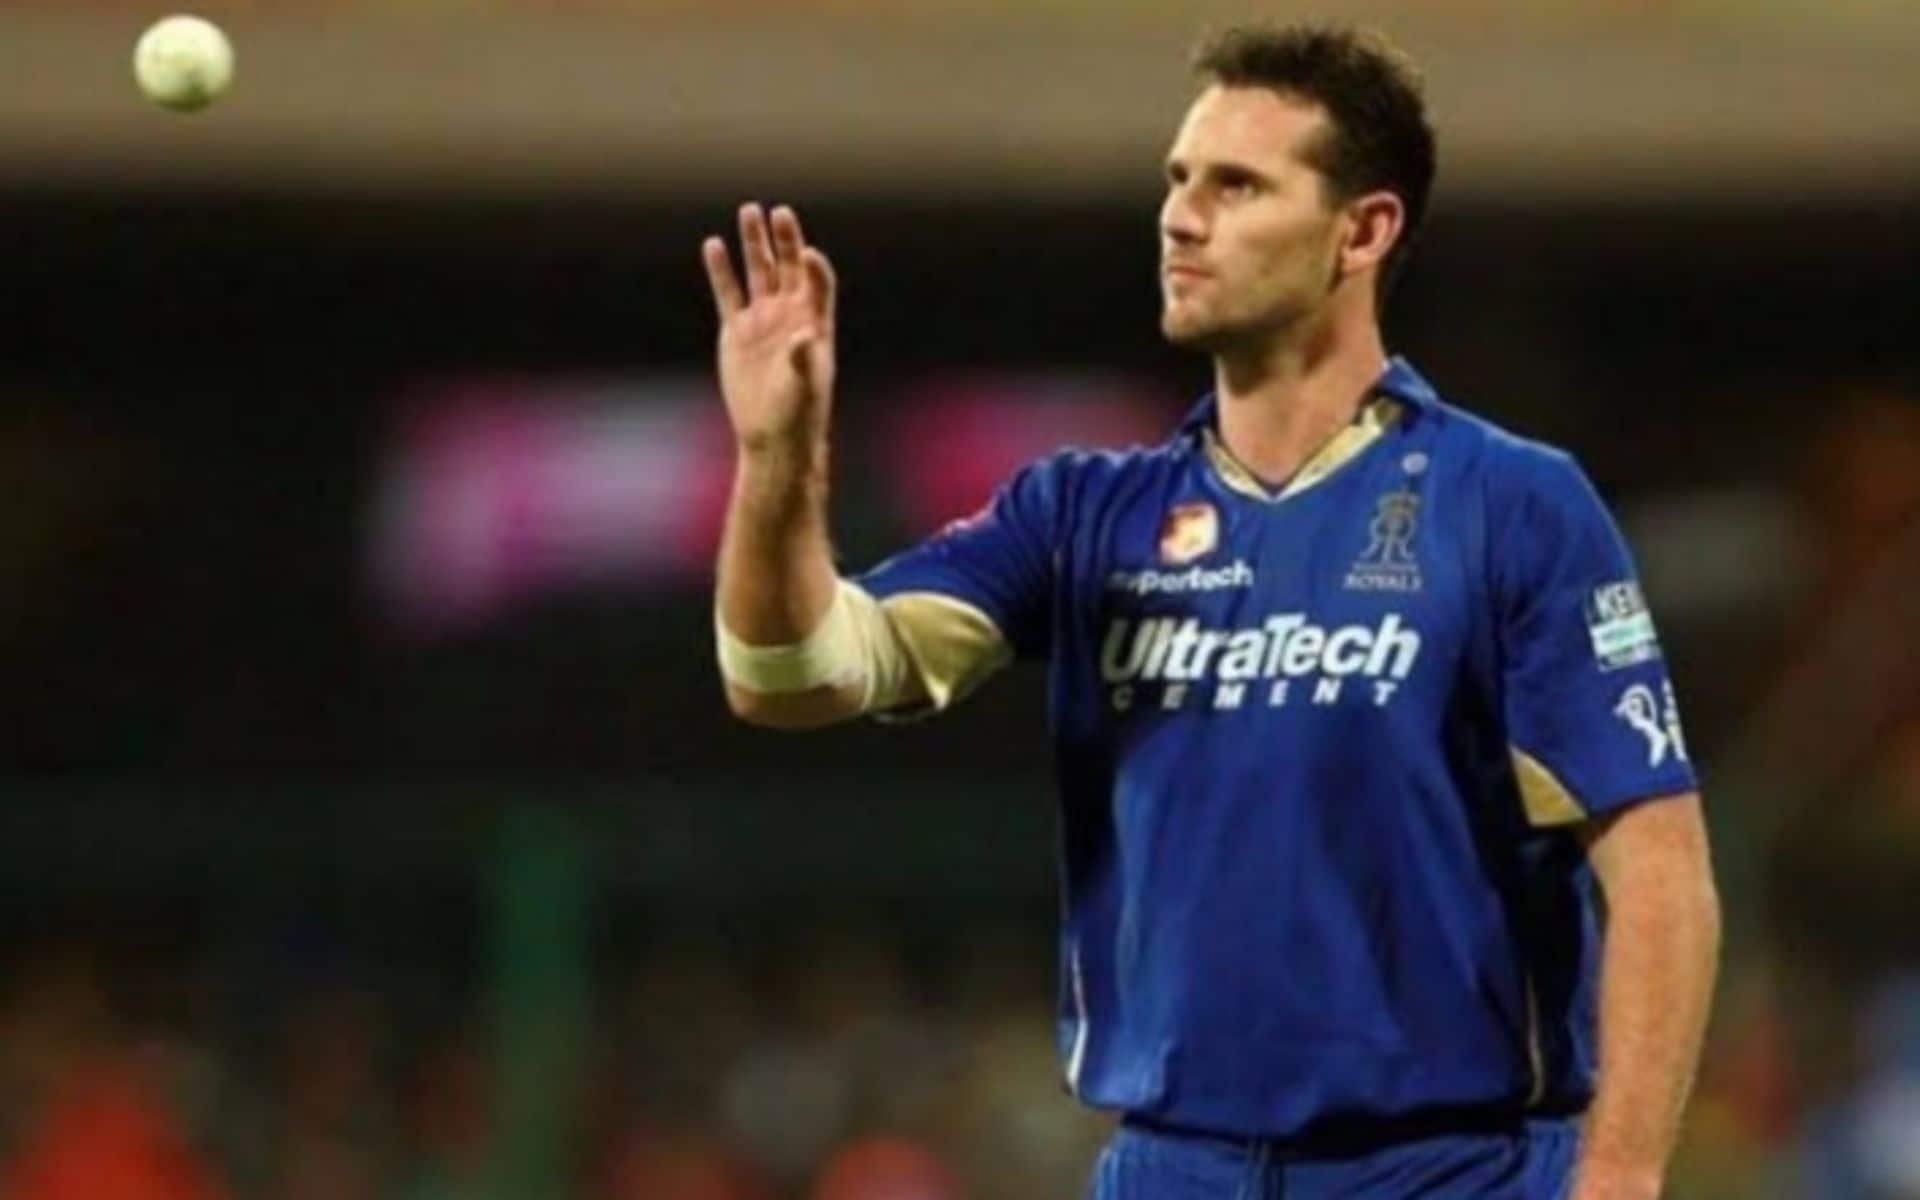 Shaun Tait's 157.7 kmph is the fastest delivery in the history of the IPL (X.com)